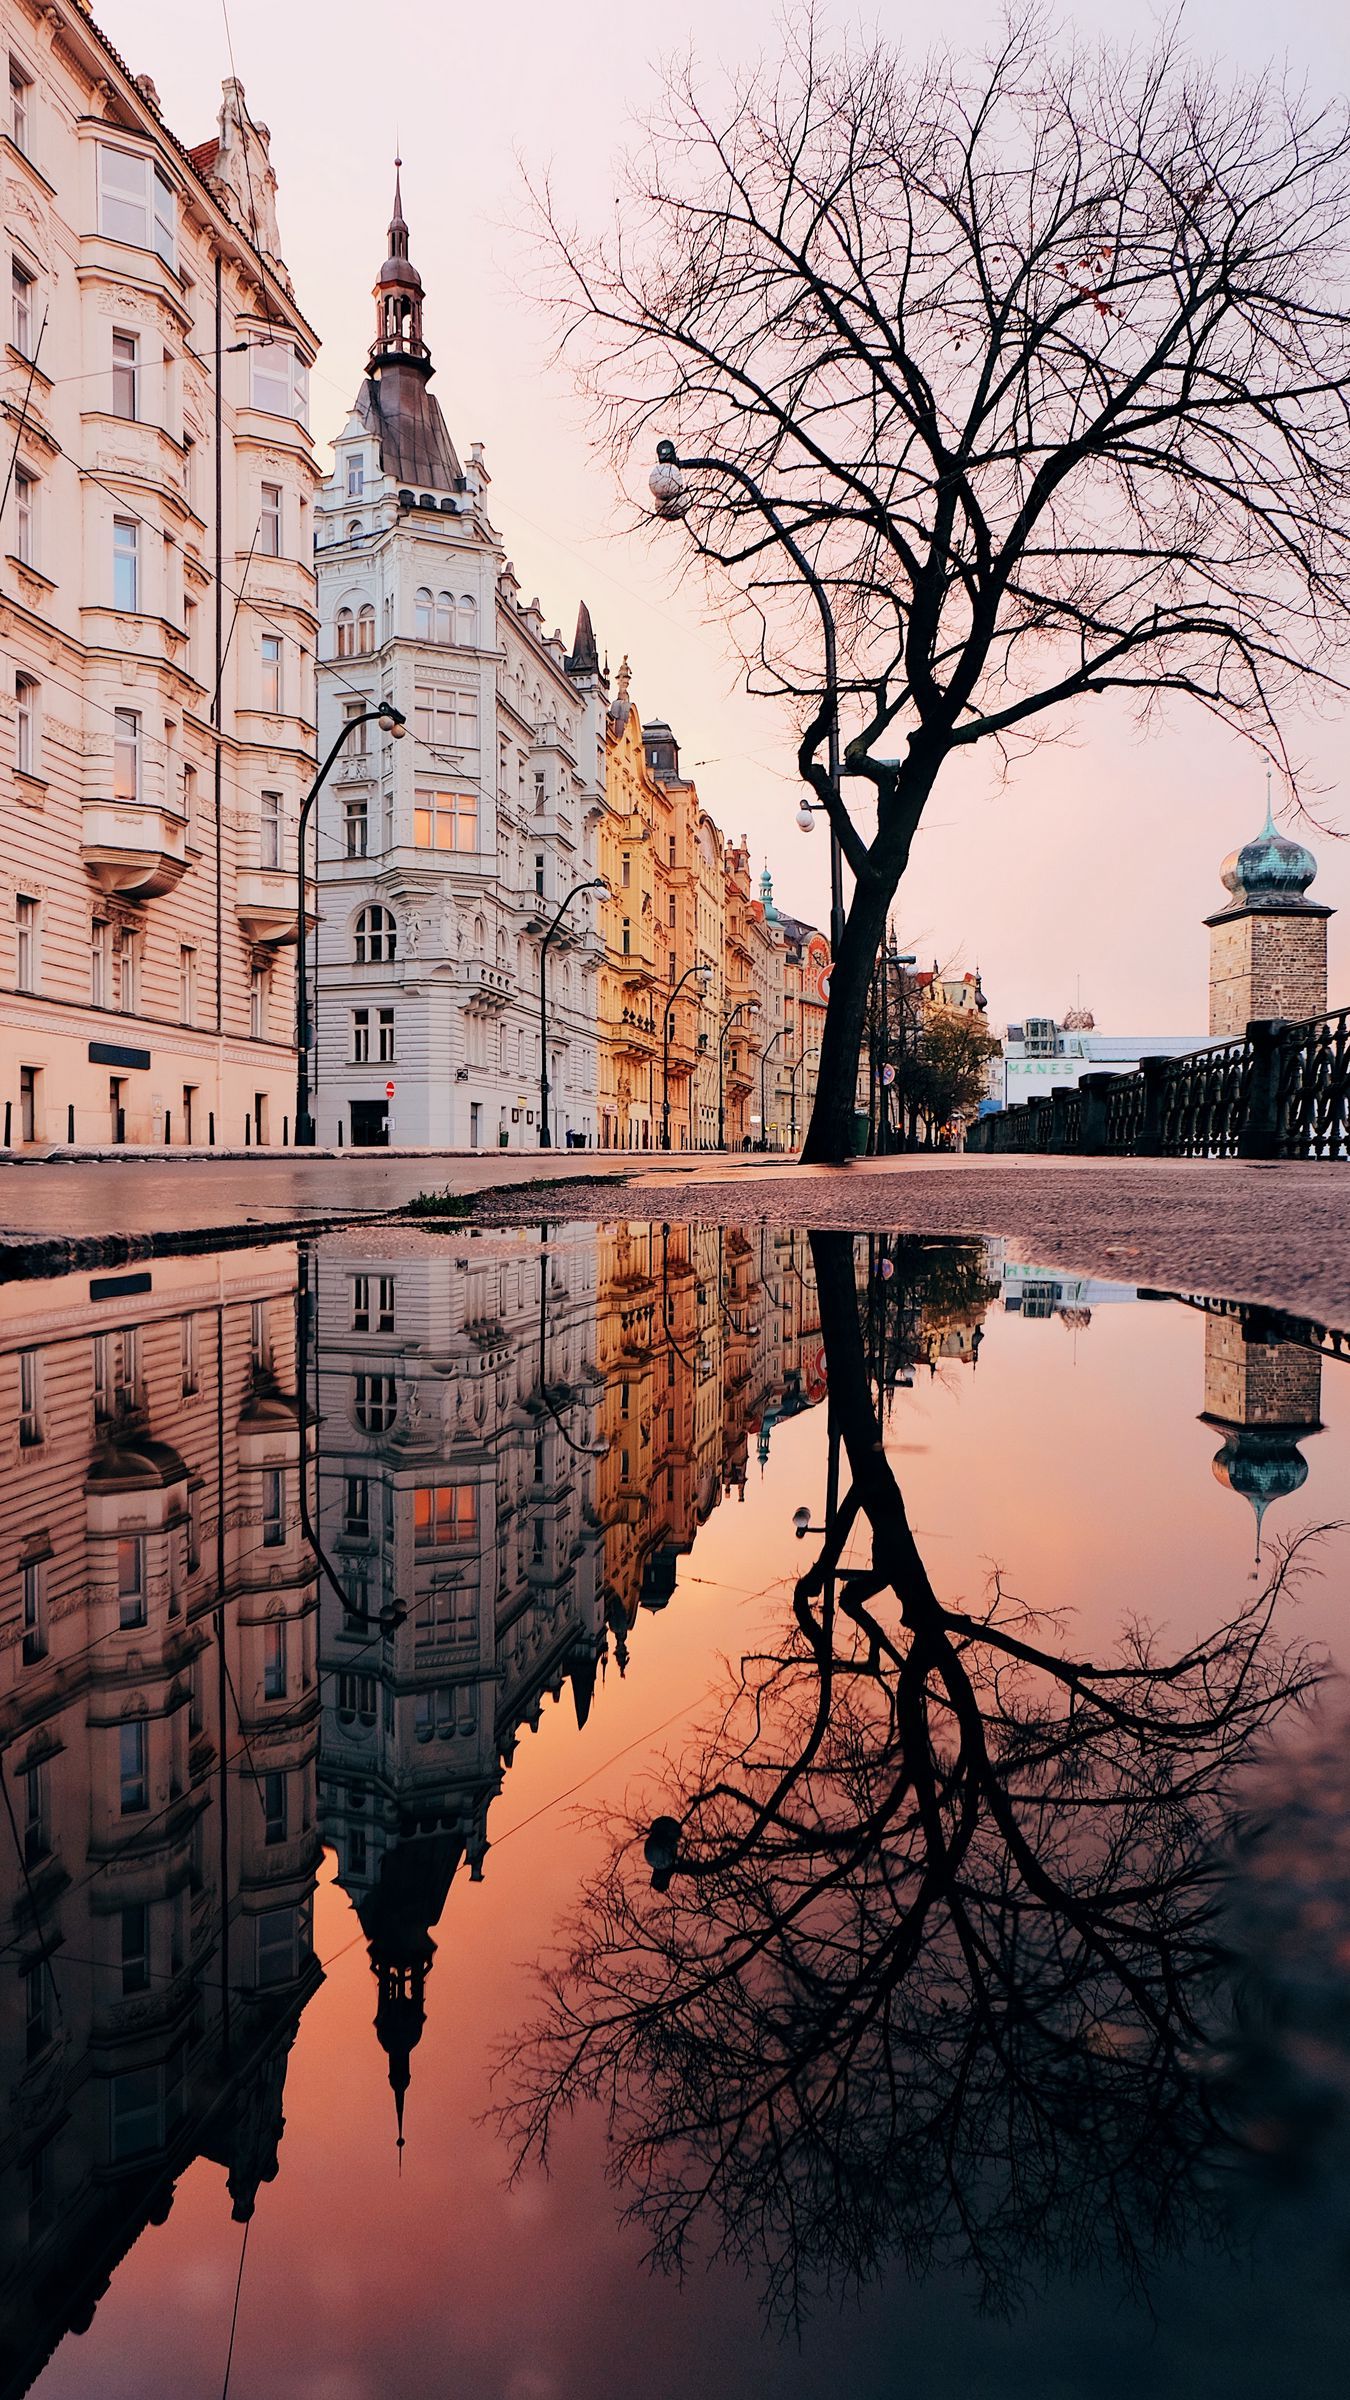 Download wallpaper 1350x2400 architecture, puddle, reflection, city, prague, czechia iphone 8+/7+/6s+/for parallax HD background